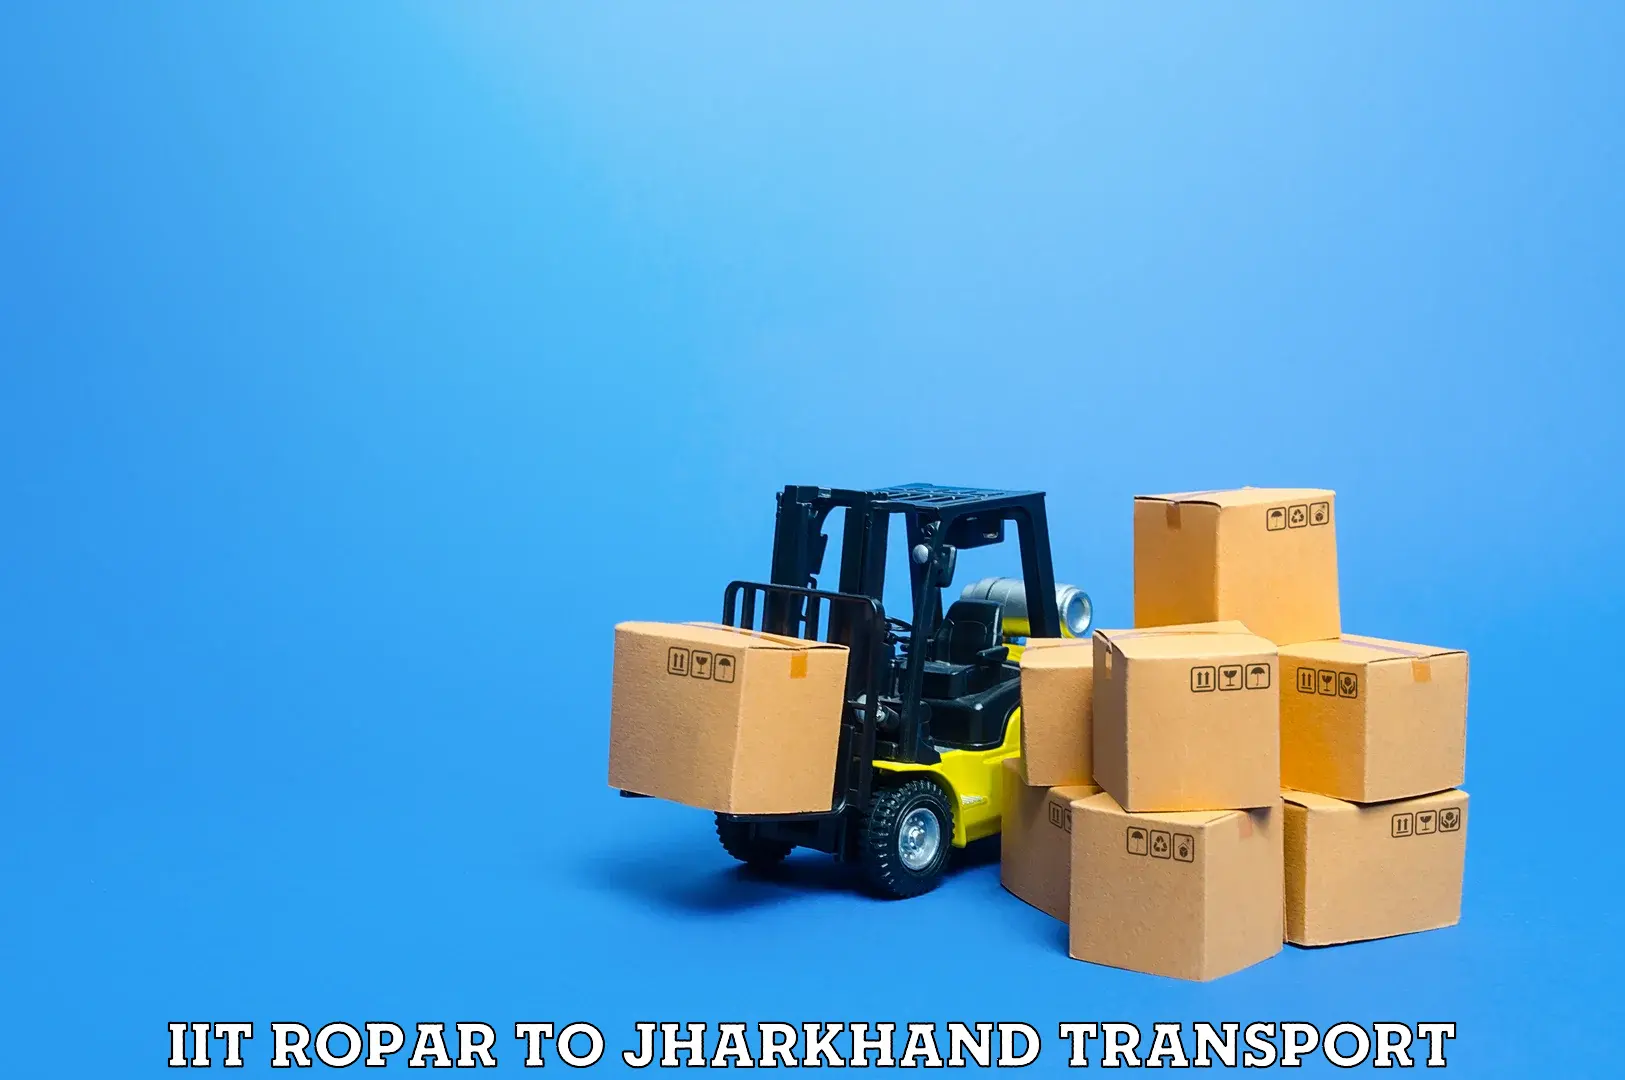 Lorry transport service IIT Ropar to Topchanchi